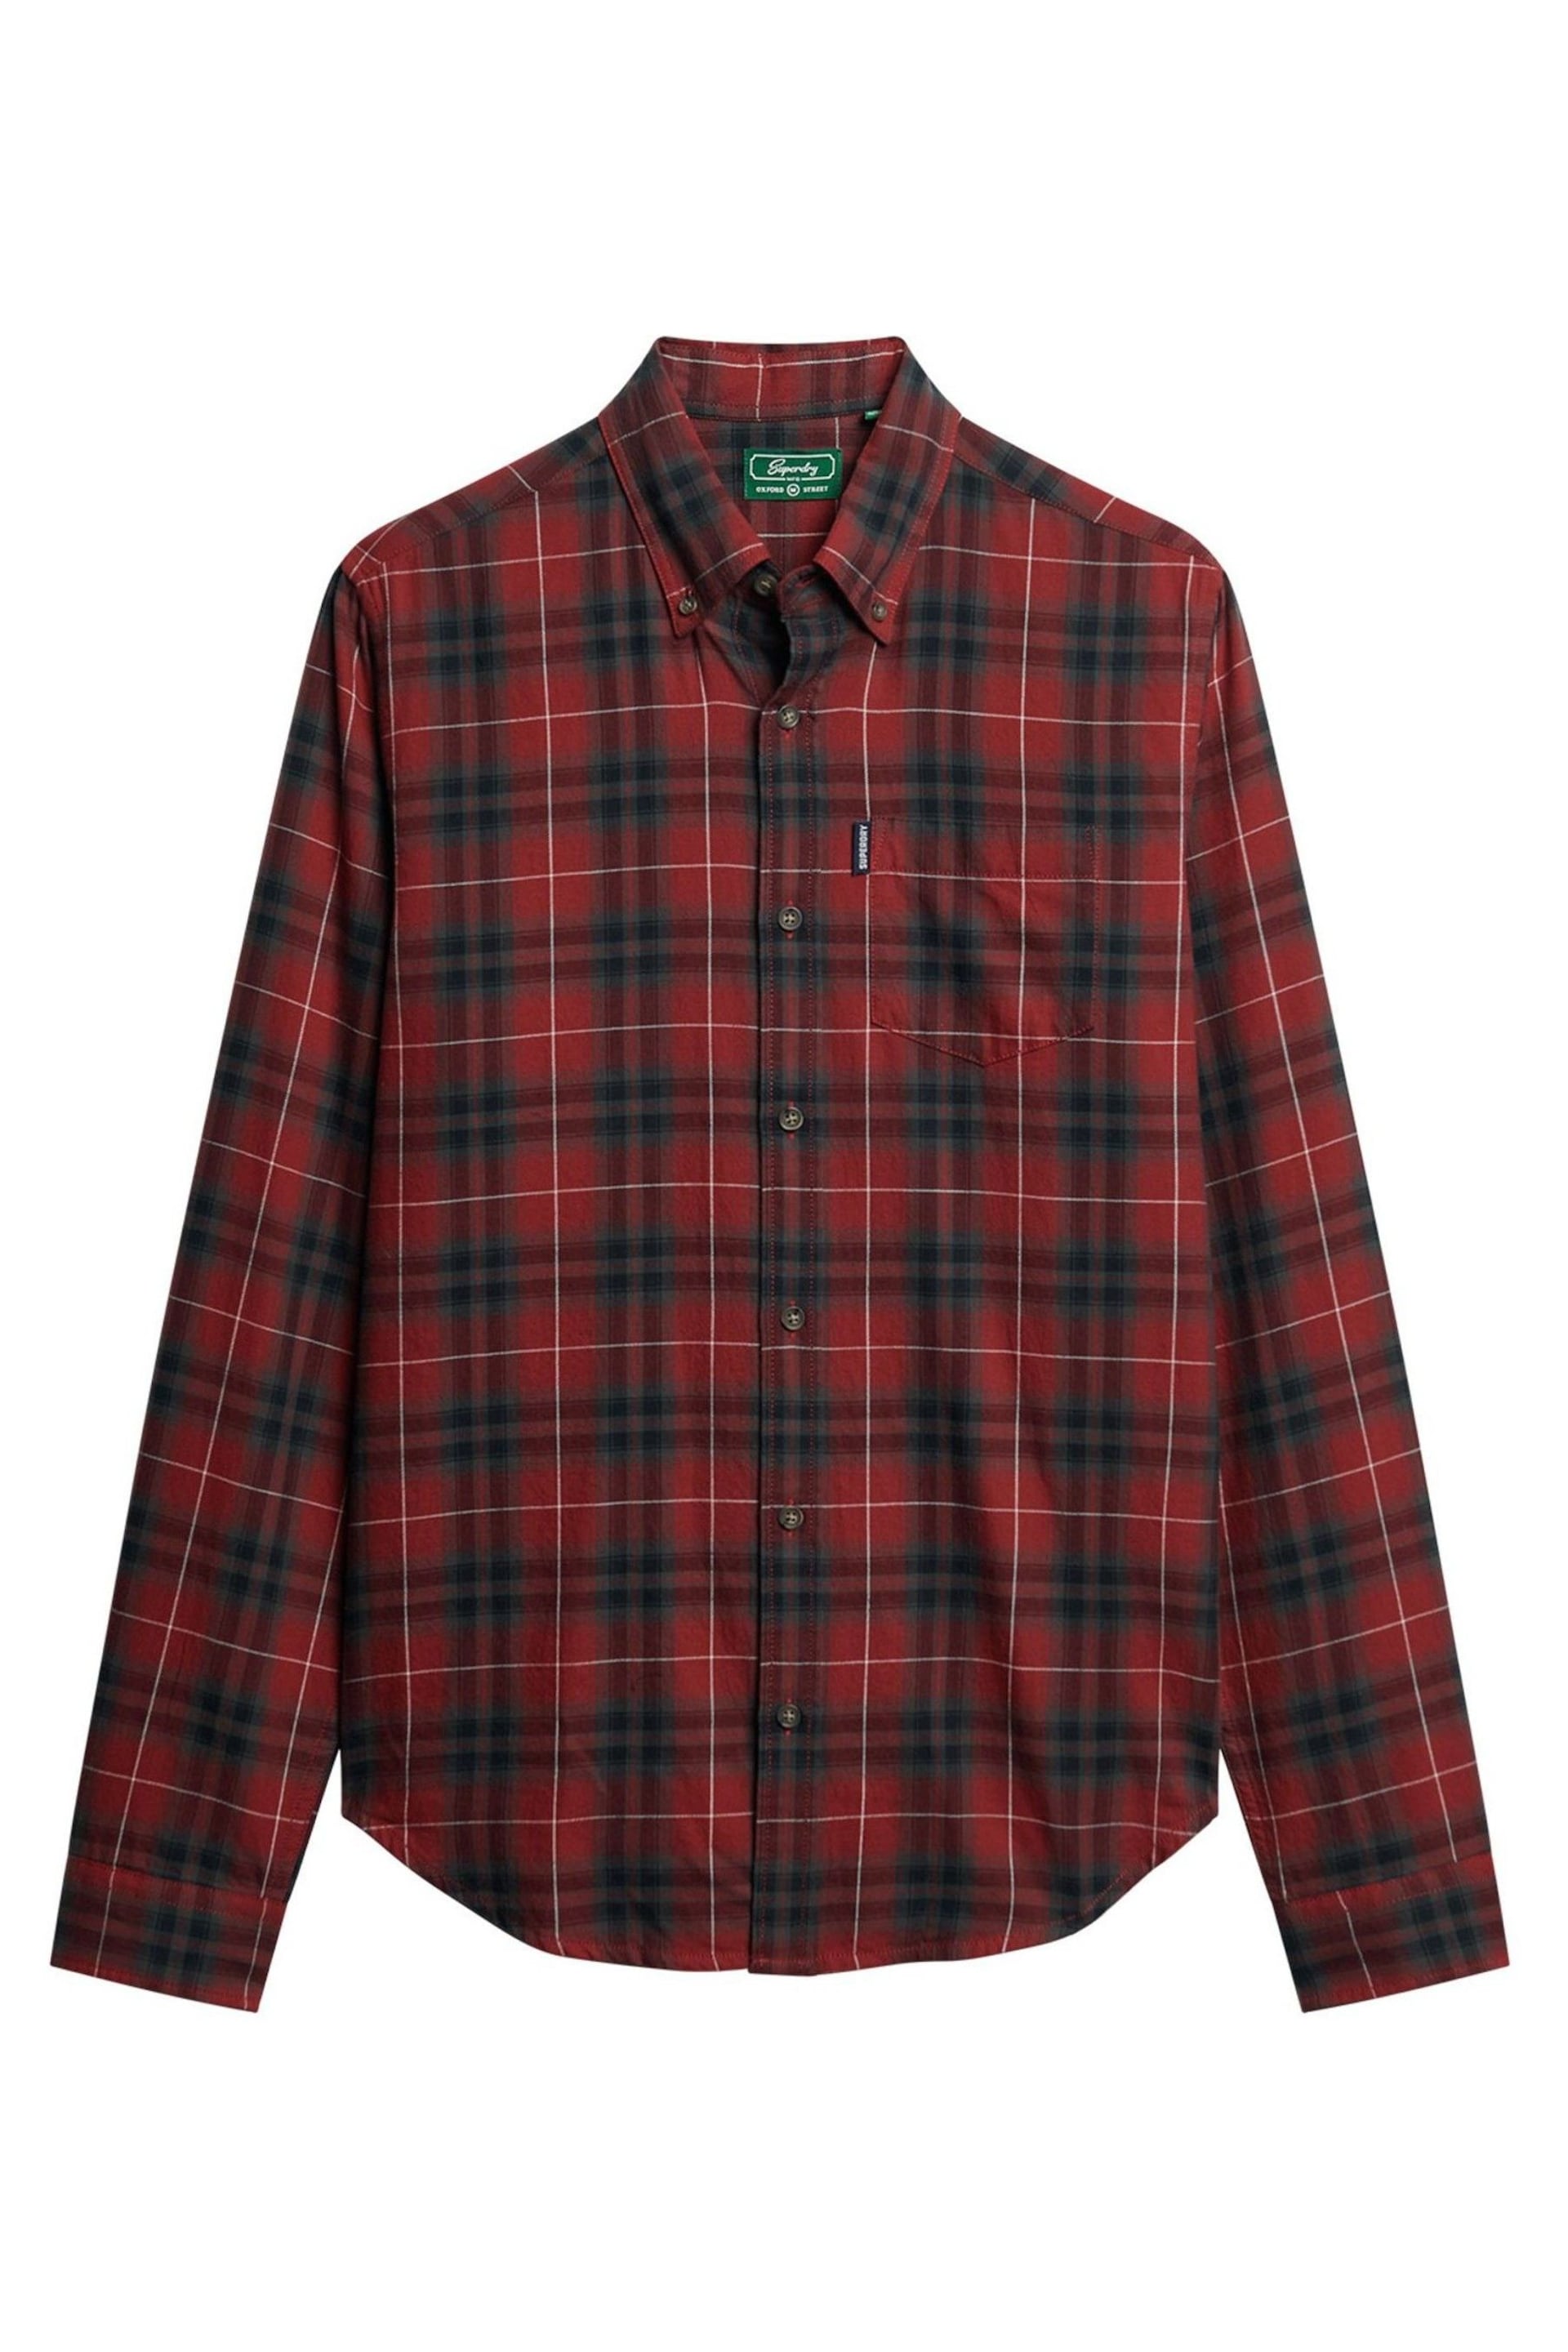 Superdry Red Vintage Check Shirt - Image 4 of 7